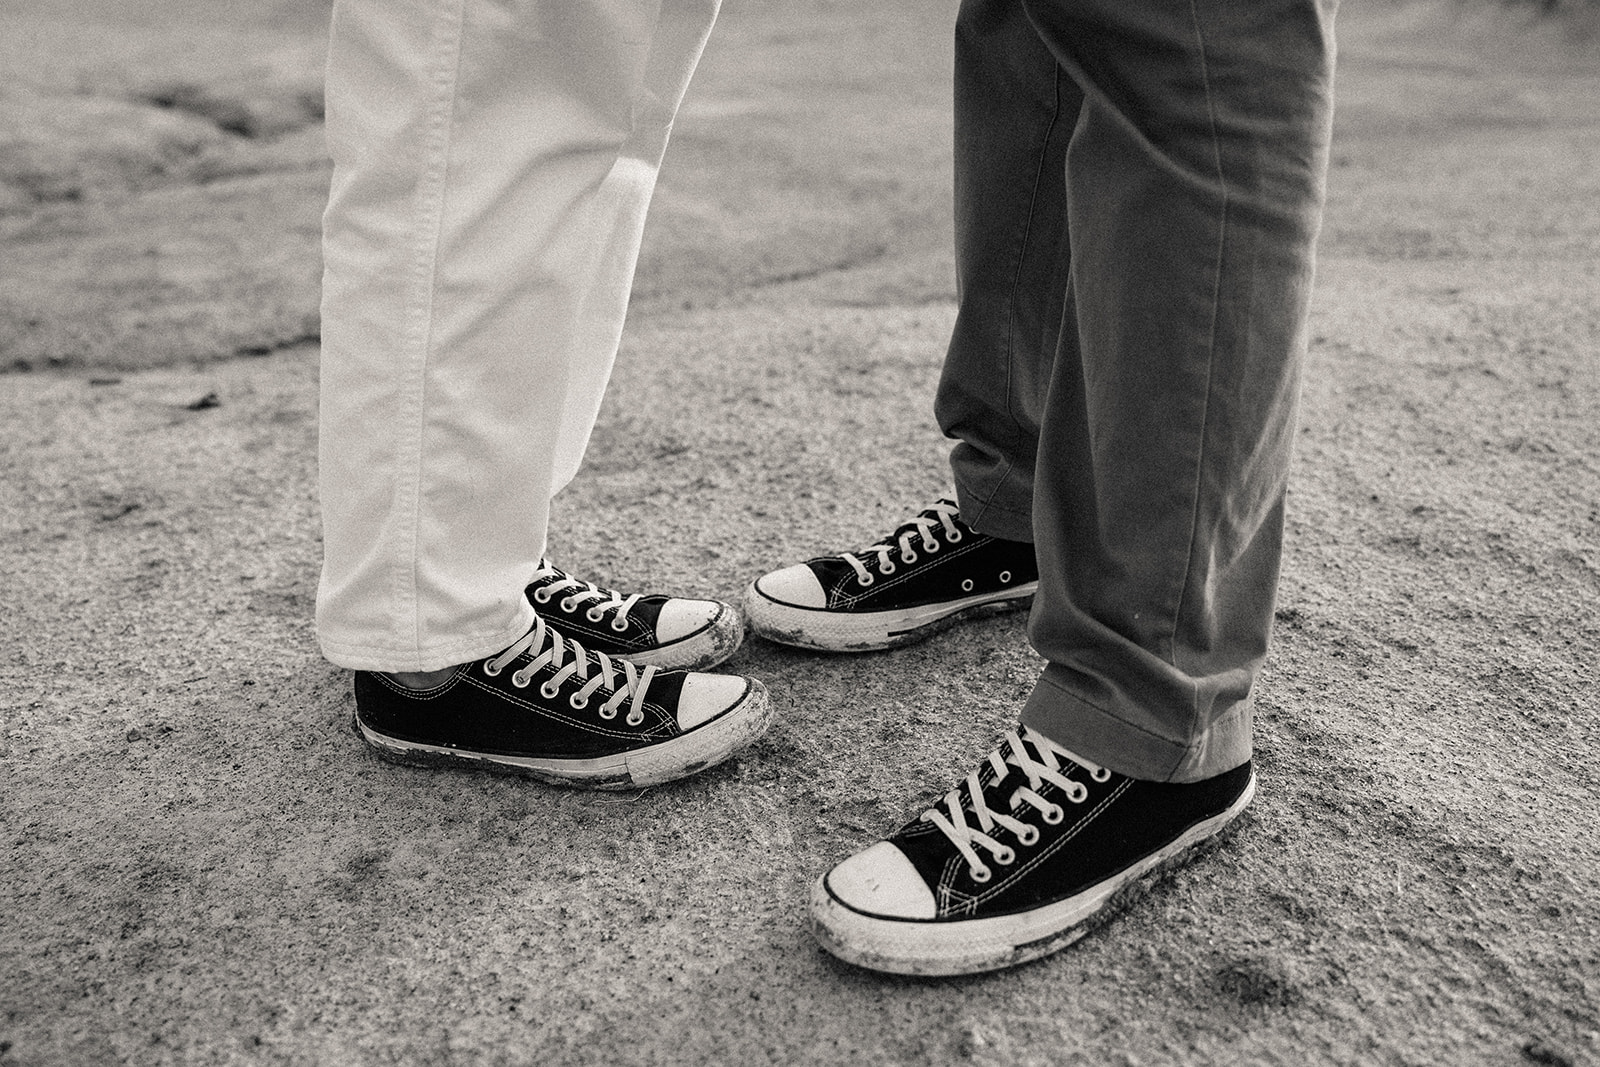 Close up to showing a woman and man wearing long pants and convers